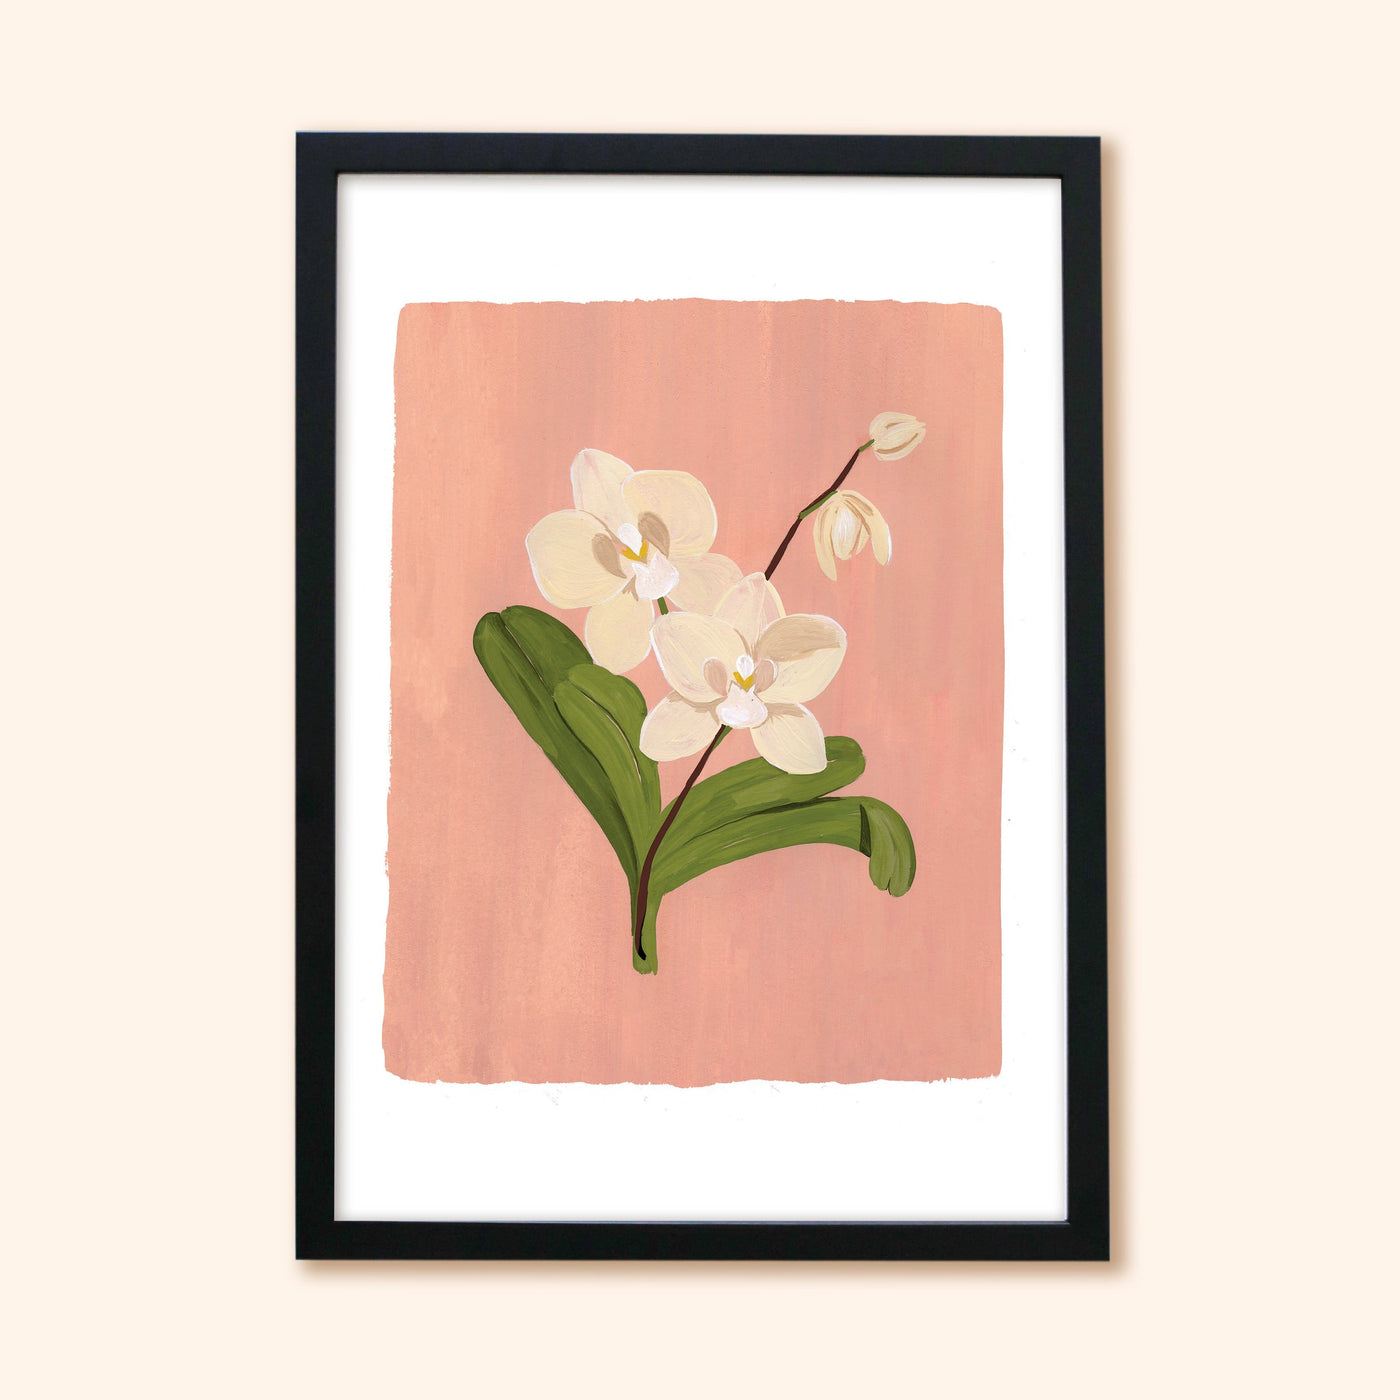 A Botanical Print Of A Cream Orchid On A Soft Pink Background In A Black Frame - Annie Dornan Smith